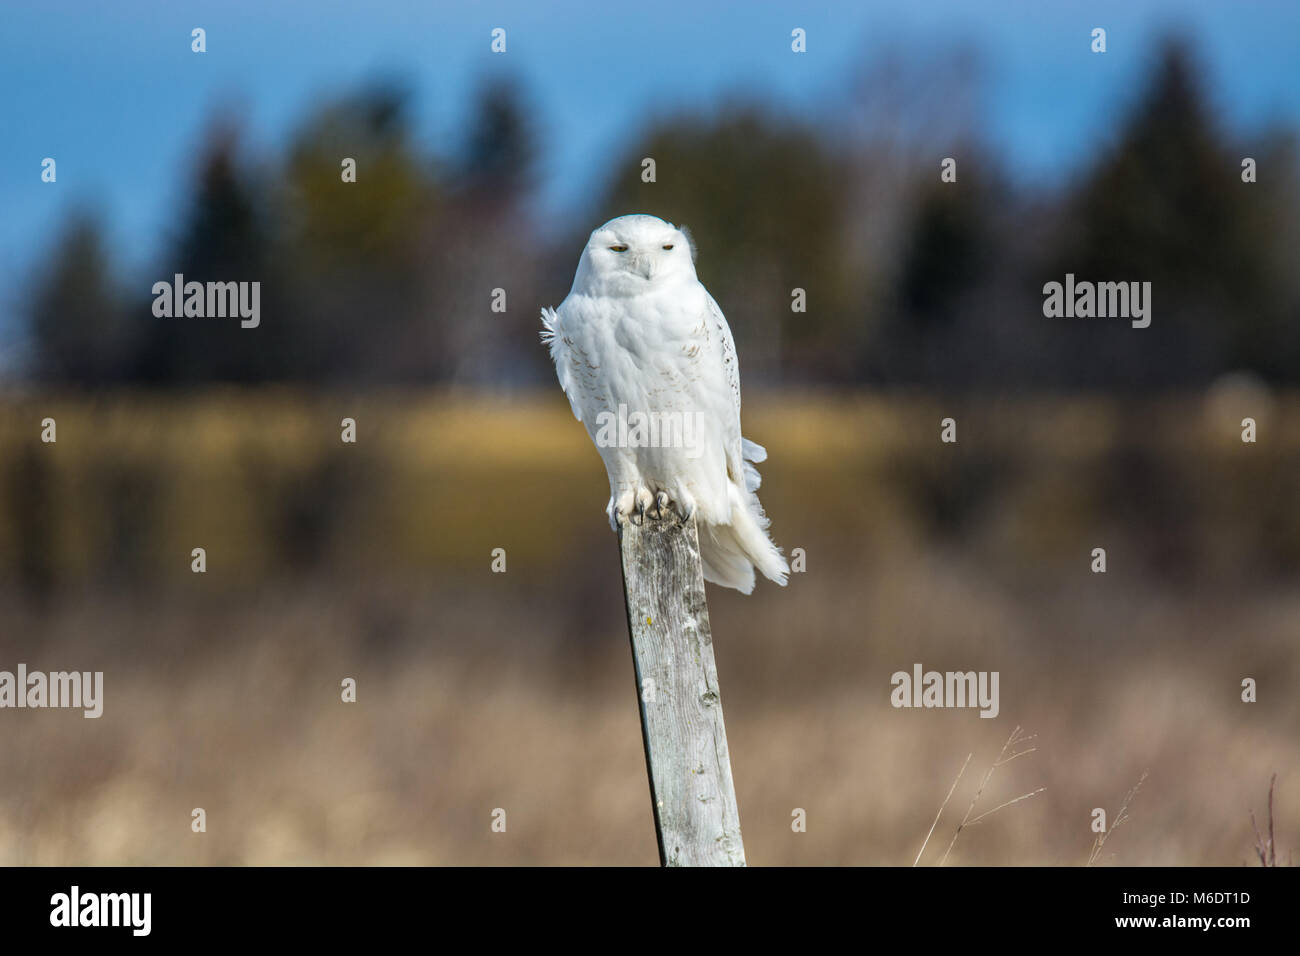 Snowy Owl Sitting On A Fence Post Stock Photo